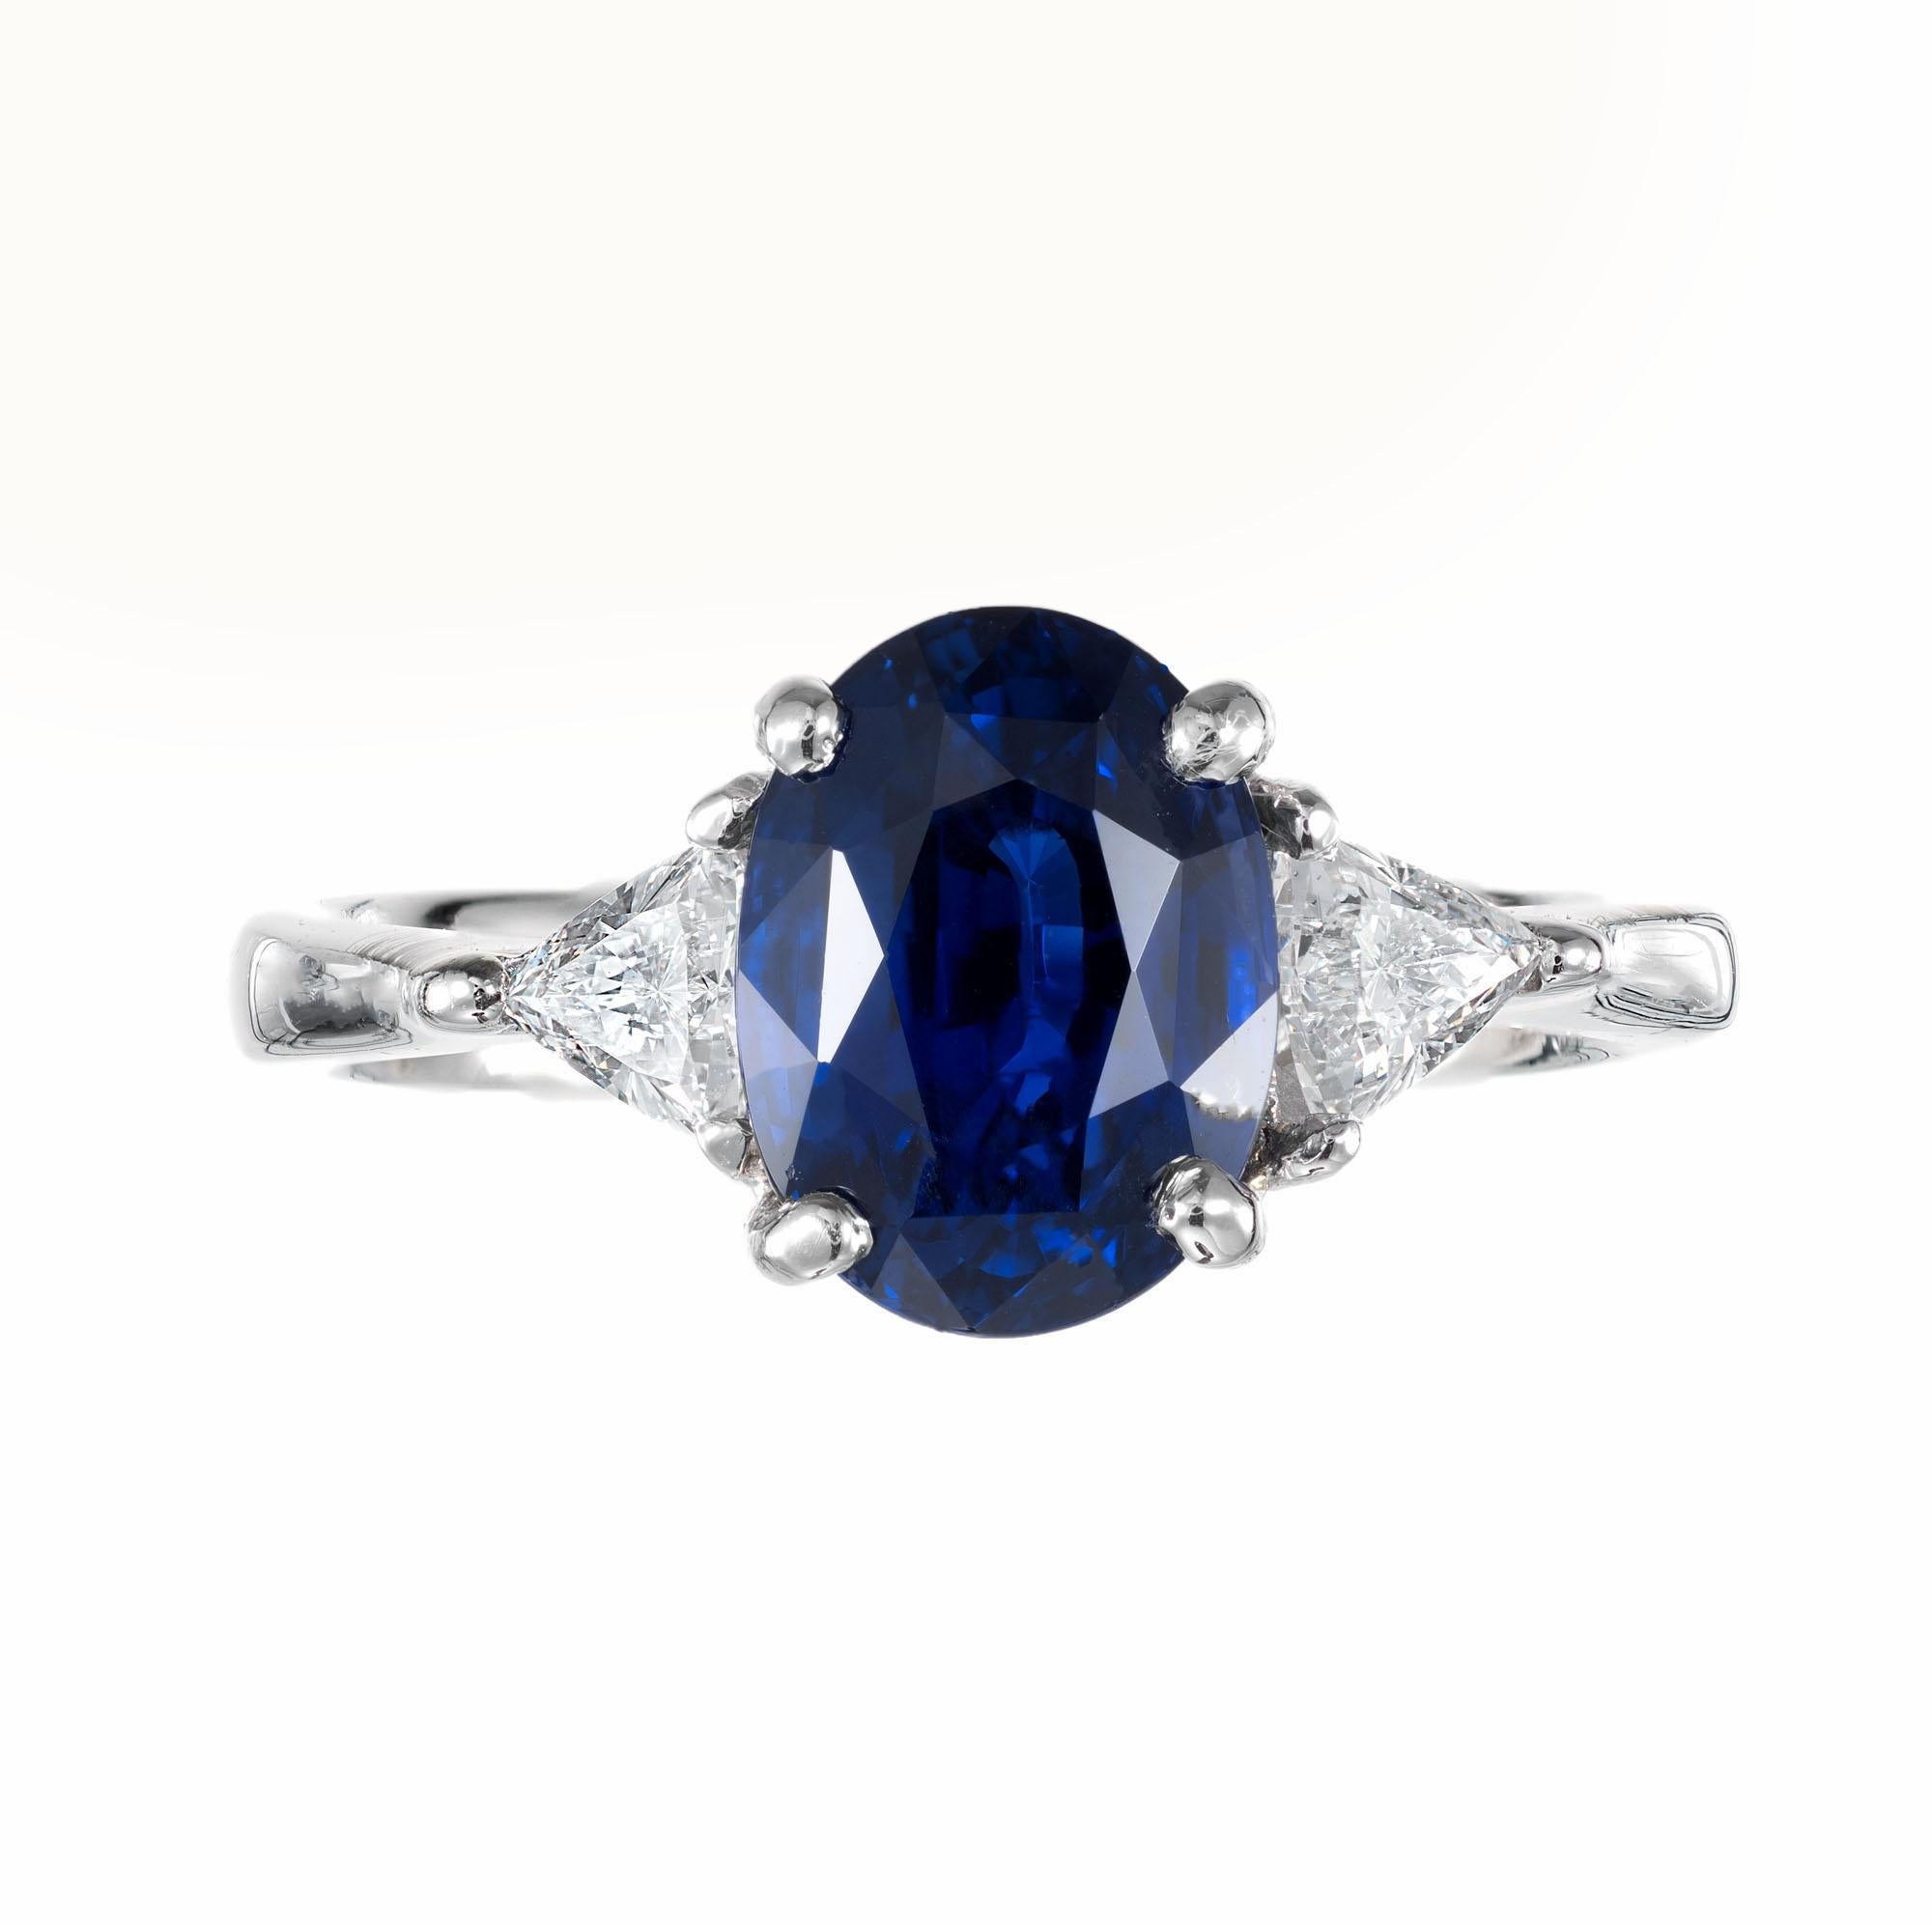 Royal blue sapphire and diamond engagement ring. GIA certified oval center sapphire accented with two trilliant cut diamonds, in a three-stone platinum setting designed and created in the Peter Suchy Workshop. 

1 oval gem Royal Blue Sapphire,